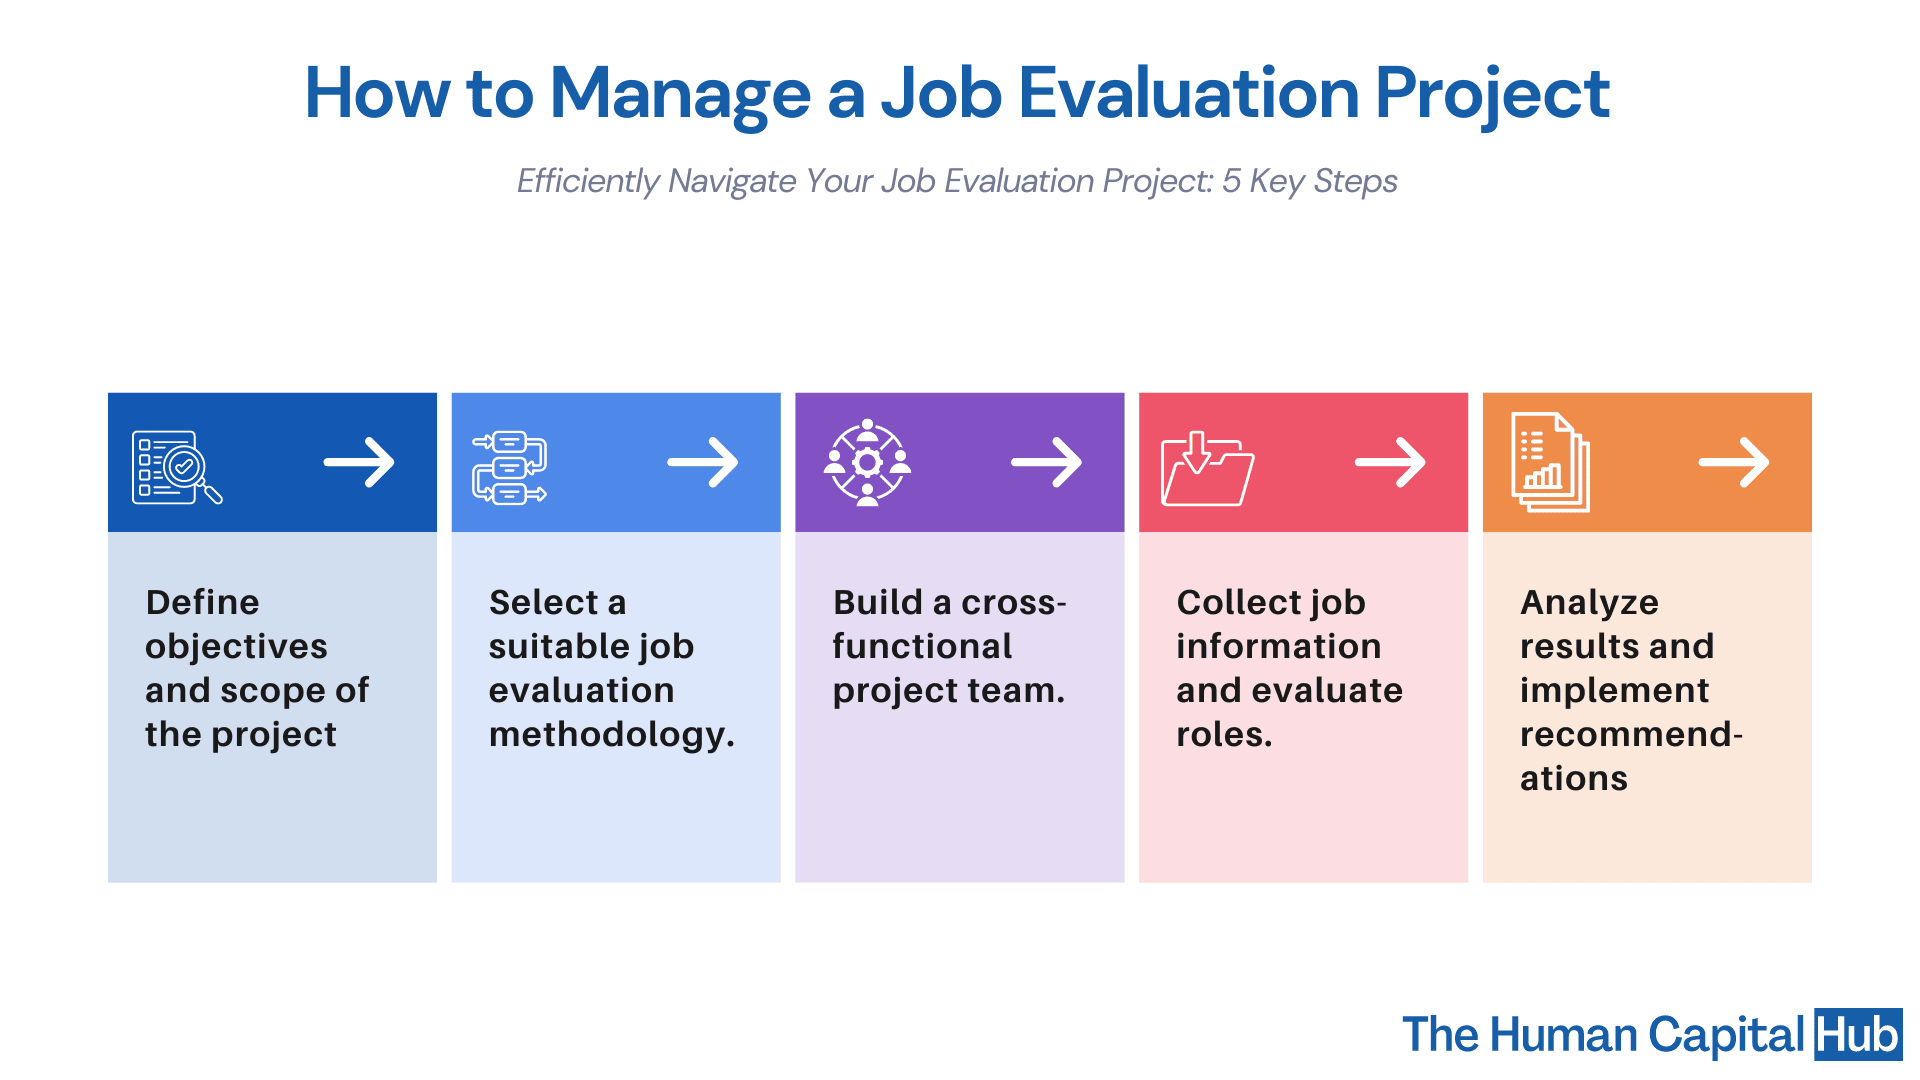 How to manage a Job Evaluation Project